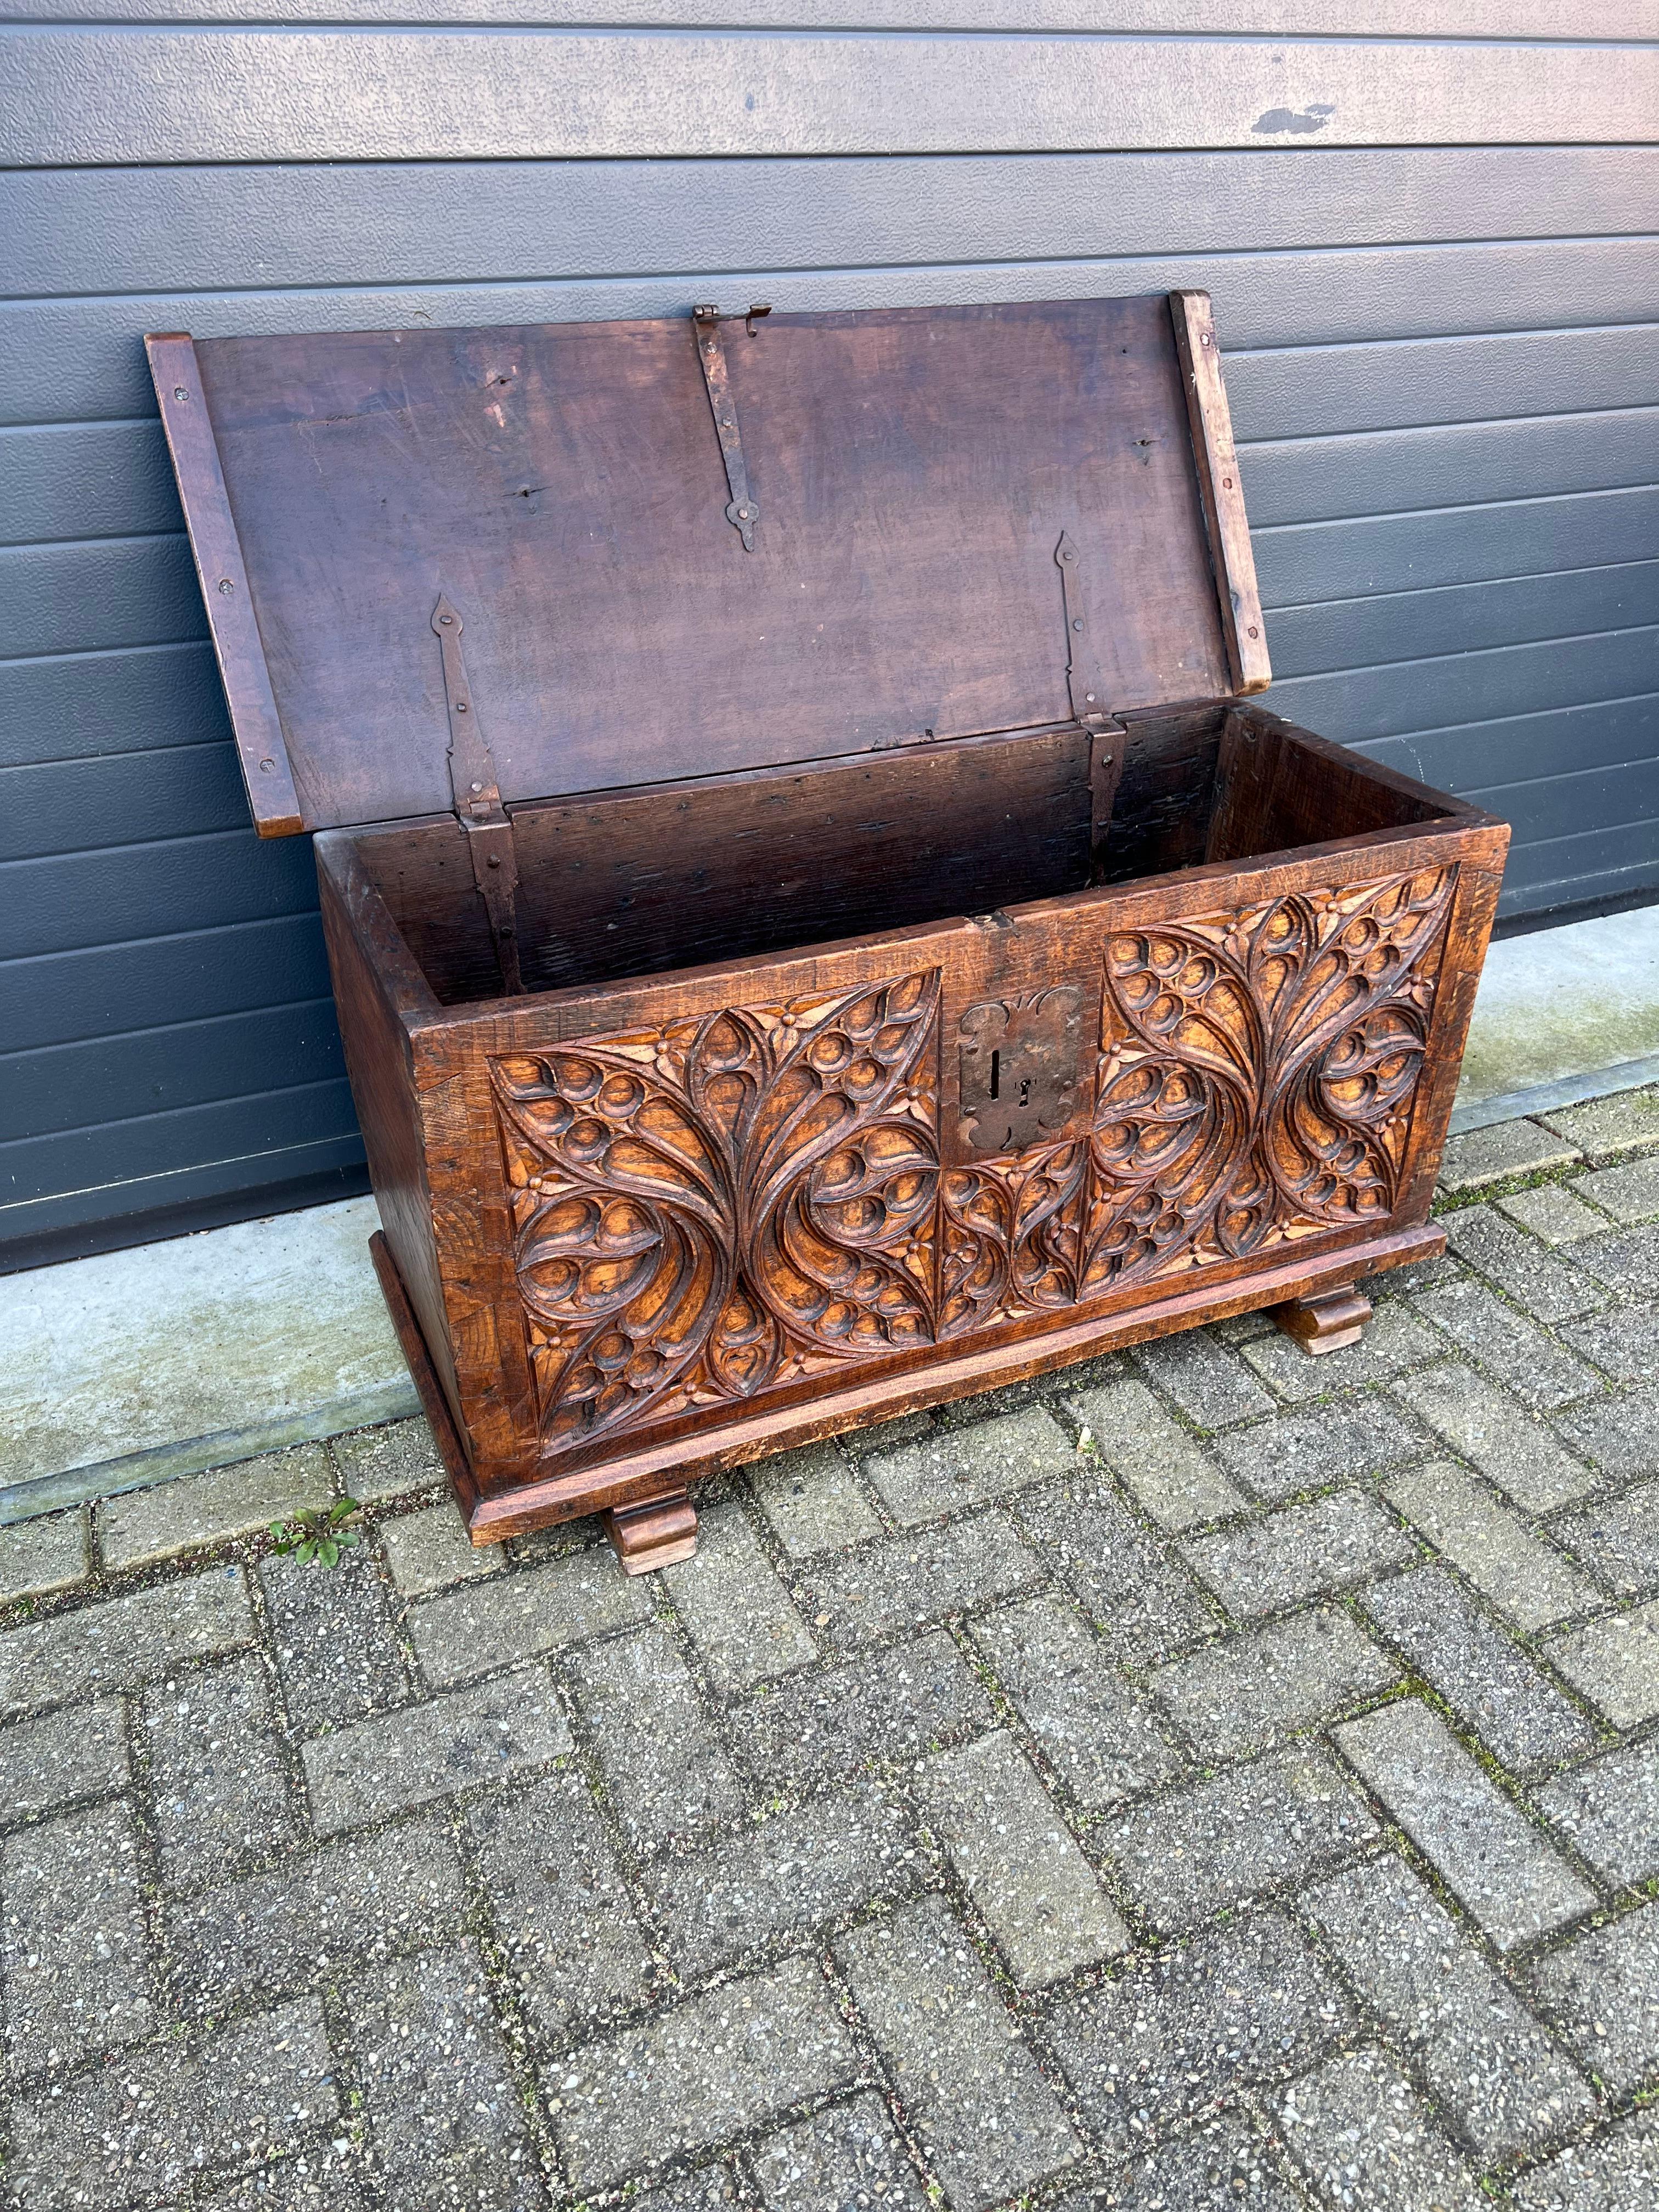 Stunning Antique Gothic Revival Hand Carved Elm Wood Blanket Chest / Trunk 1750 For Sale 5